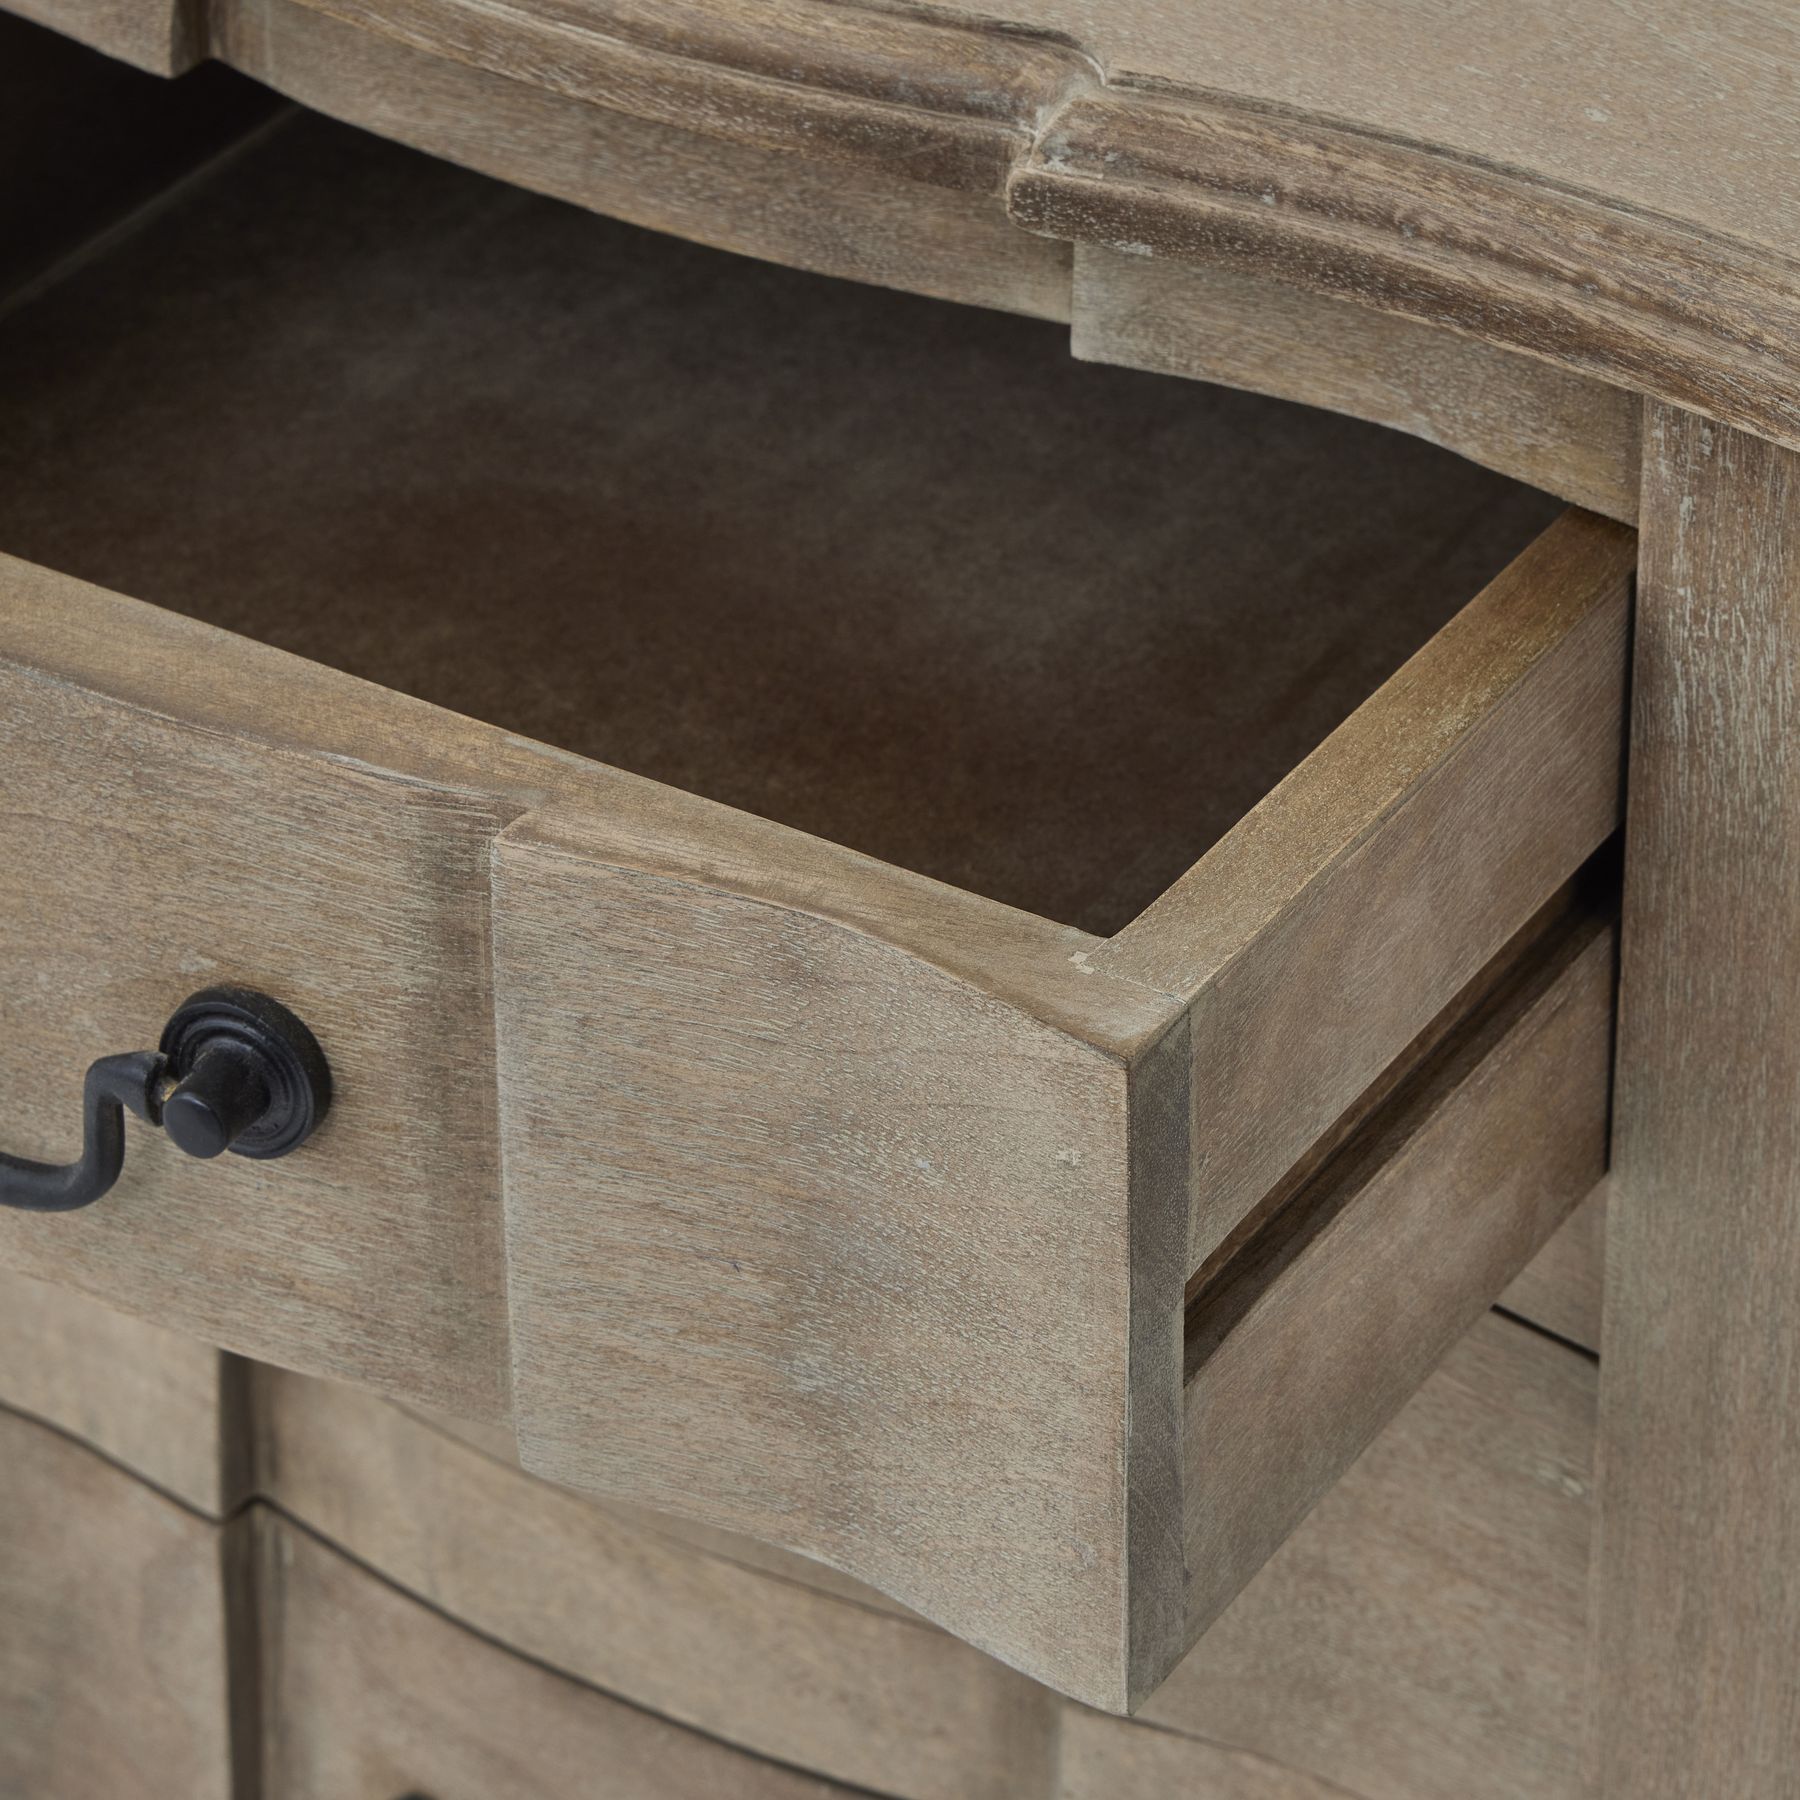 Copgrove Collection 3 Drawer Bedside Table - Image 4